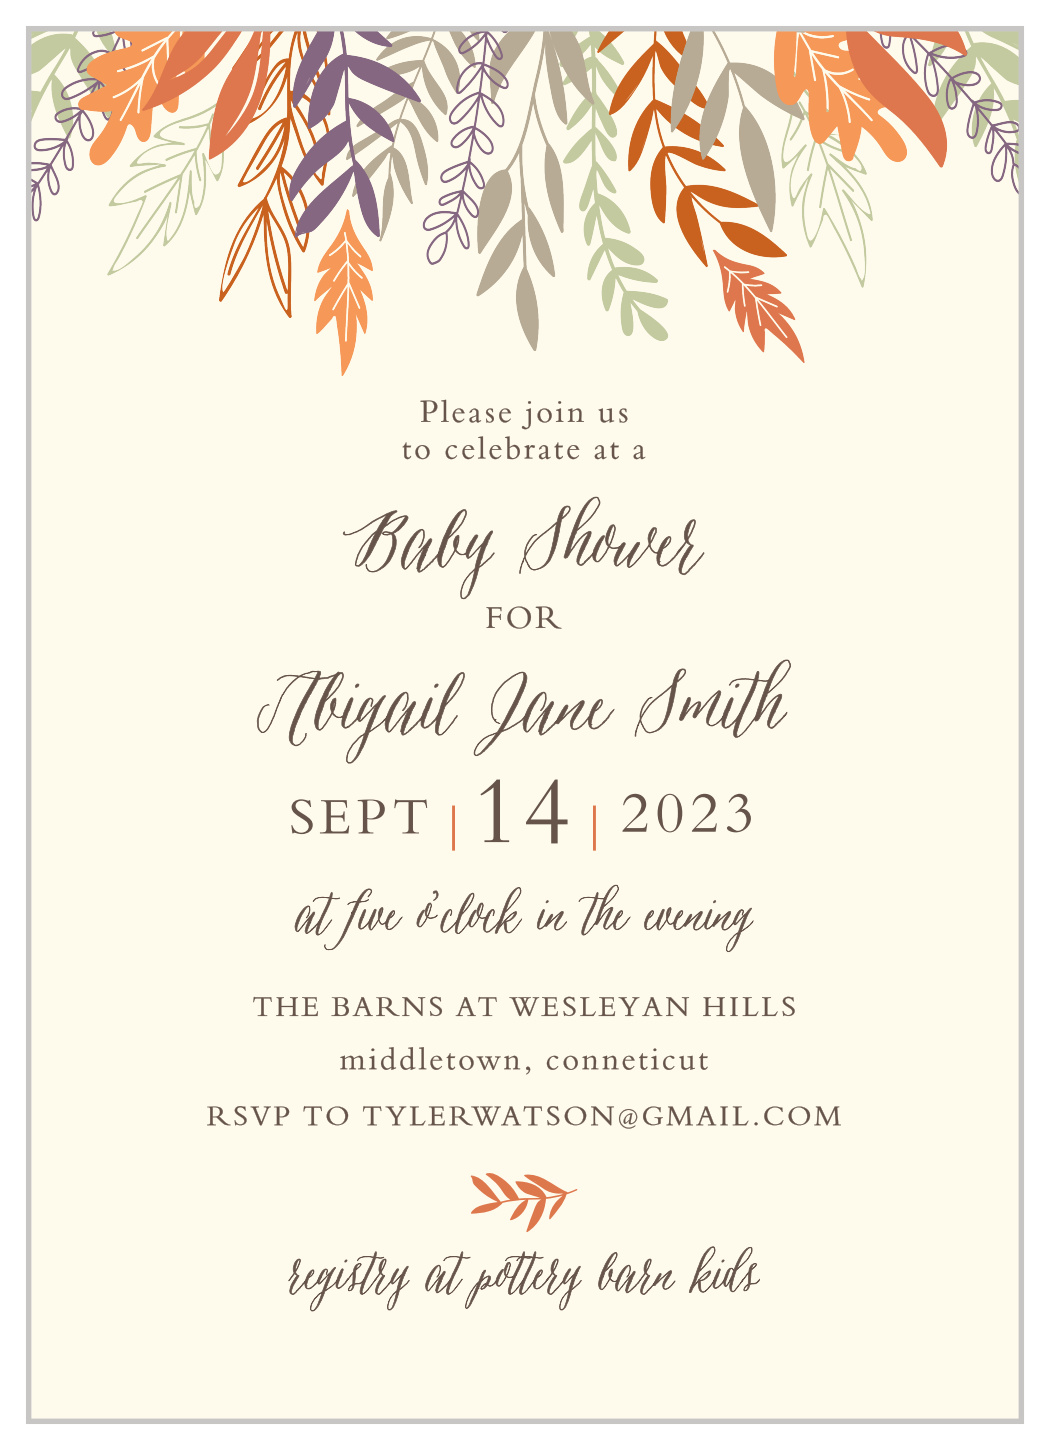 join us for baby shower